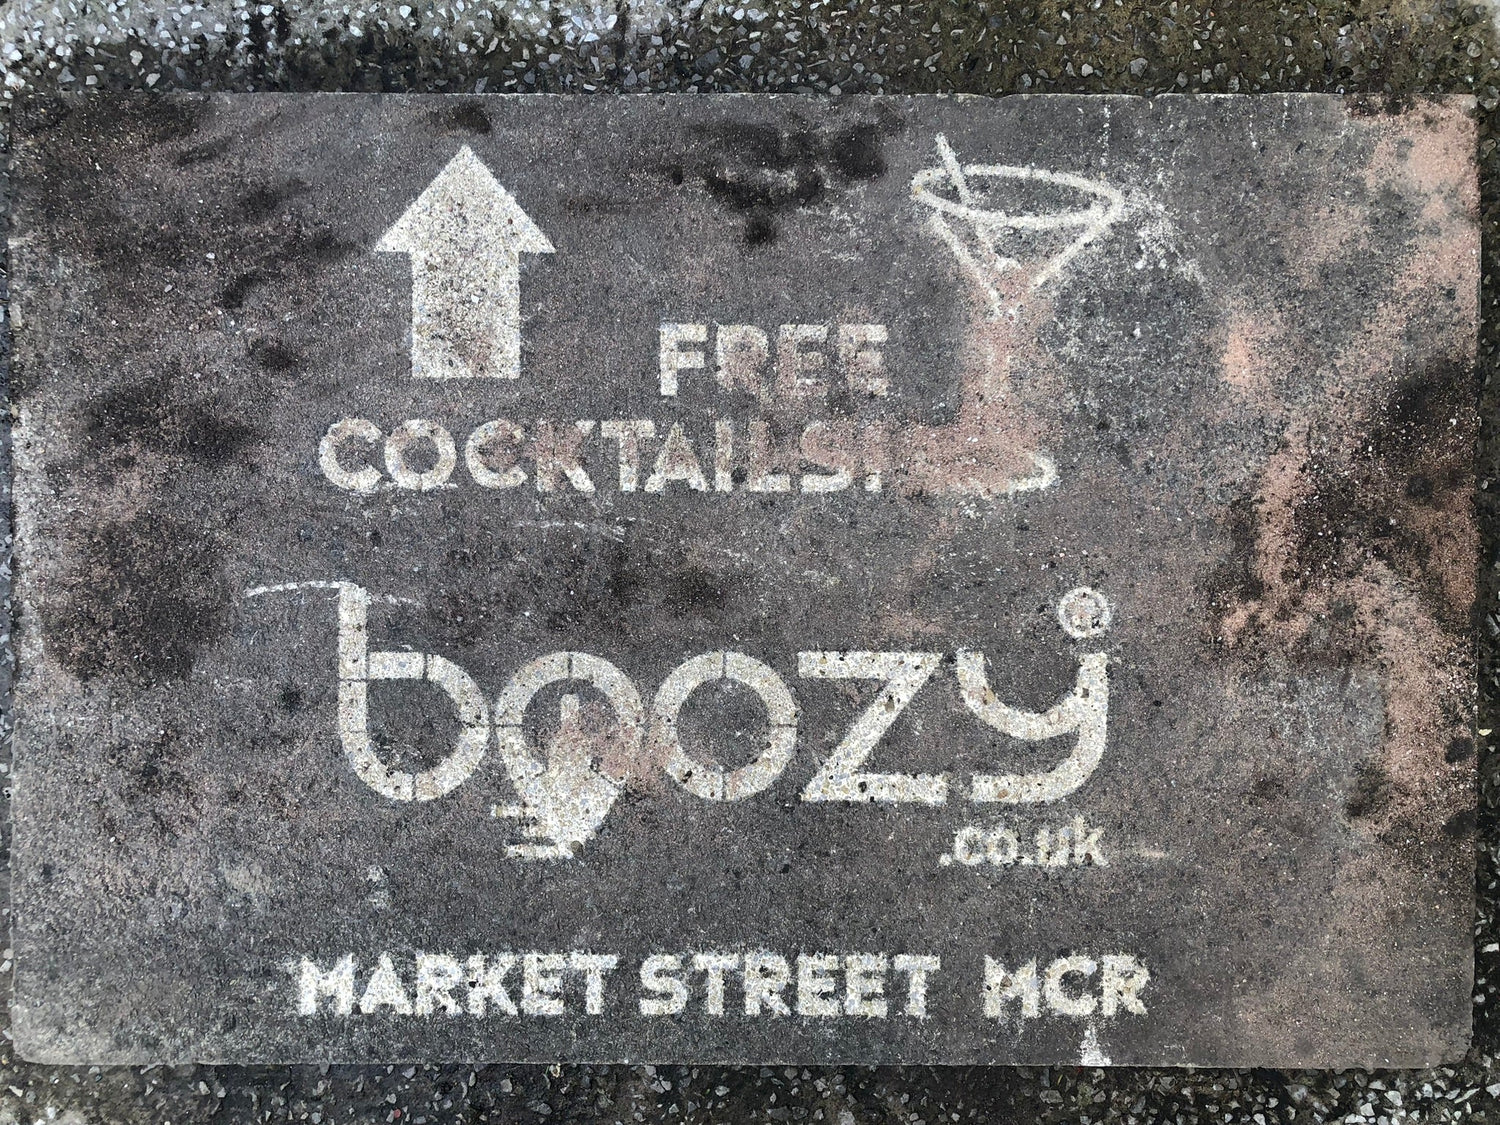 Get Ready for a Free Festive Surprise: Boozy.co.uk's Christmas Cocktail Treasure Hunt at the Christmas Markets - Boozy